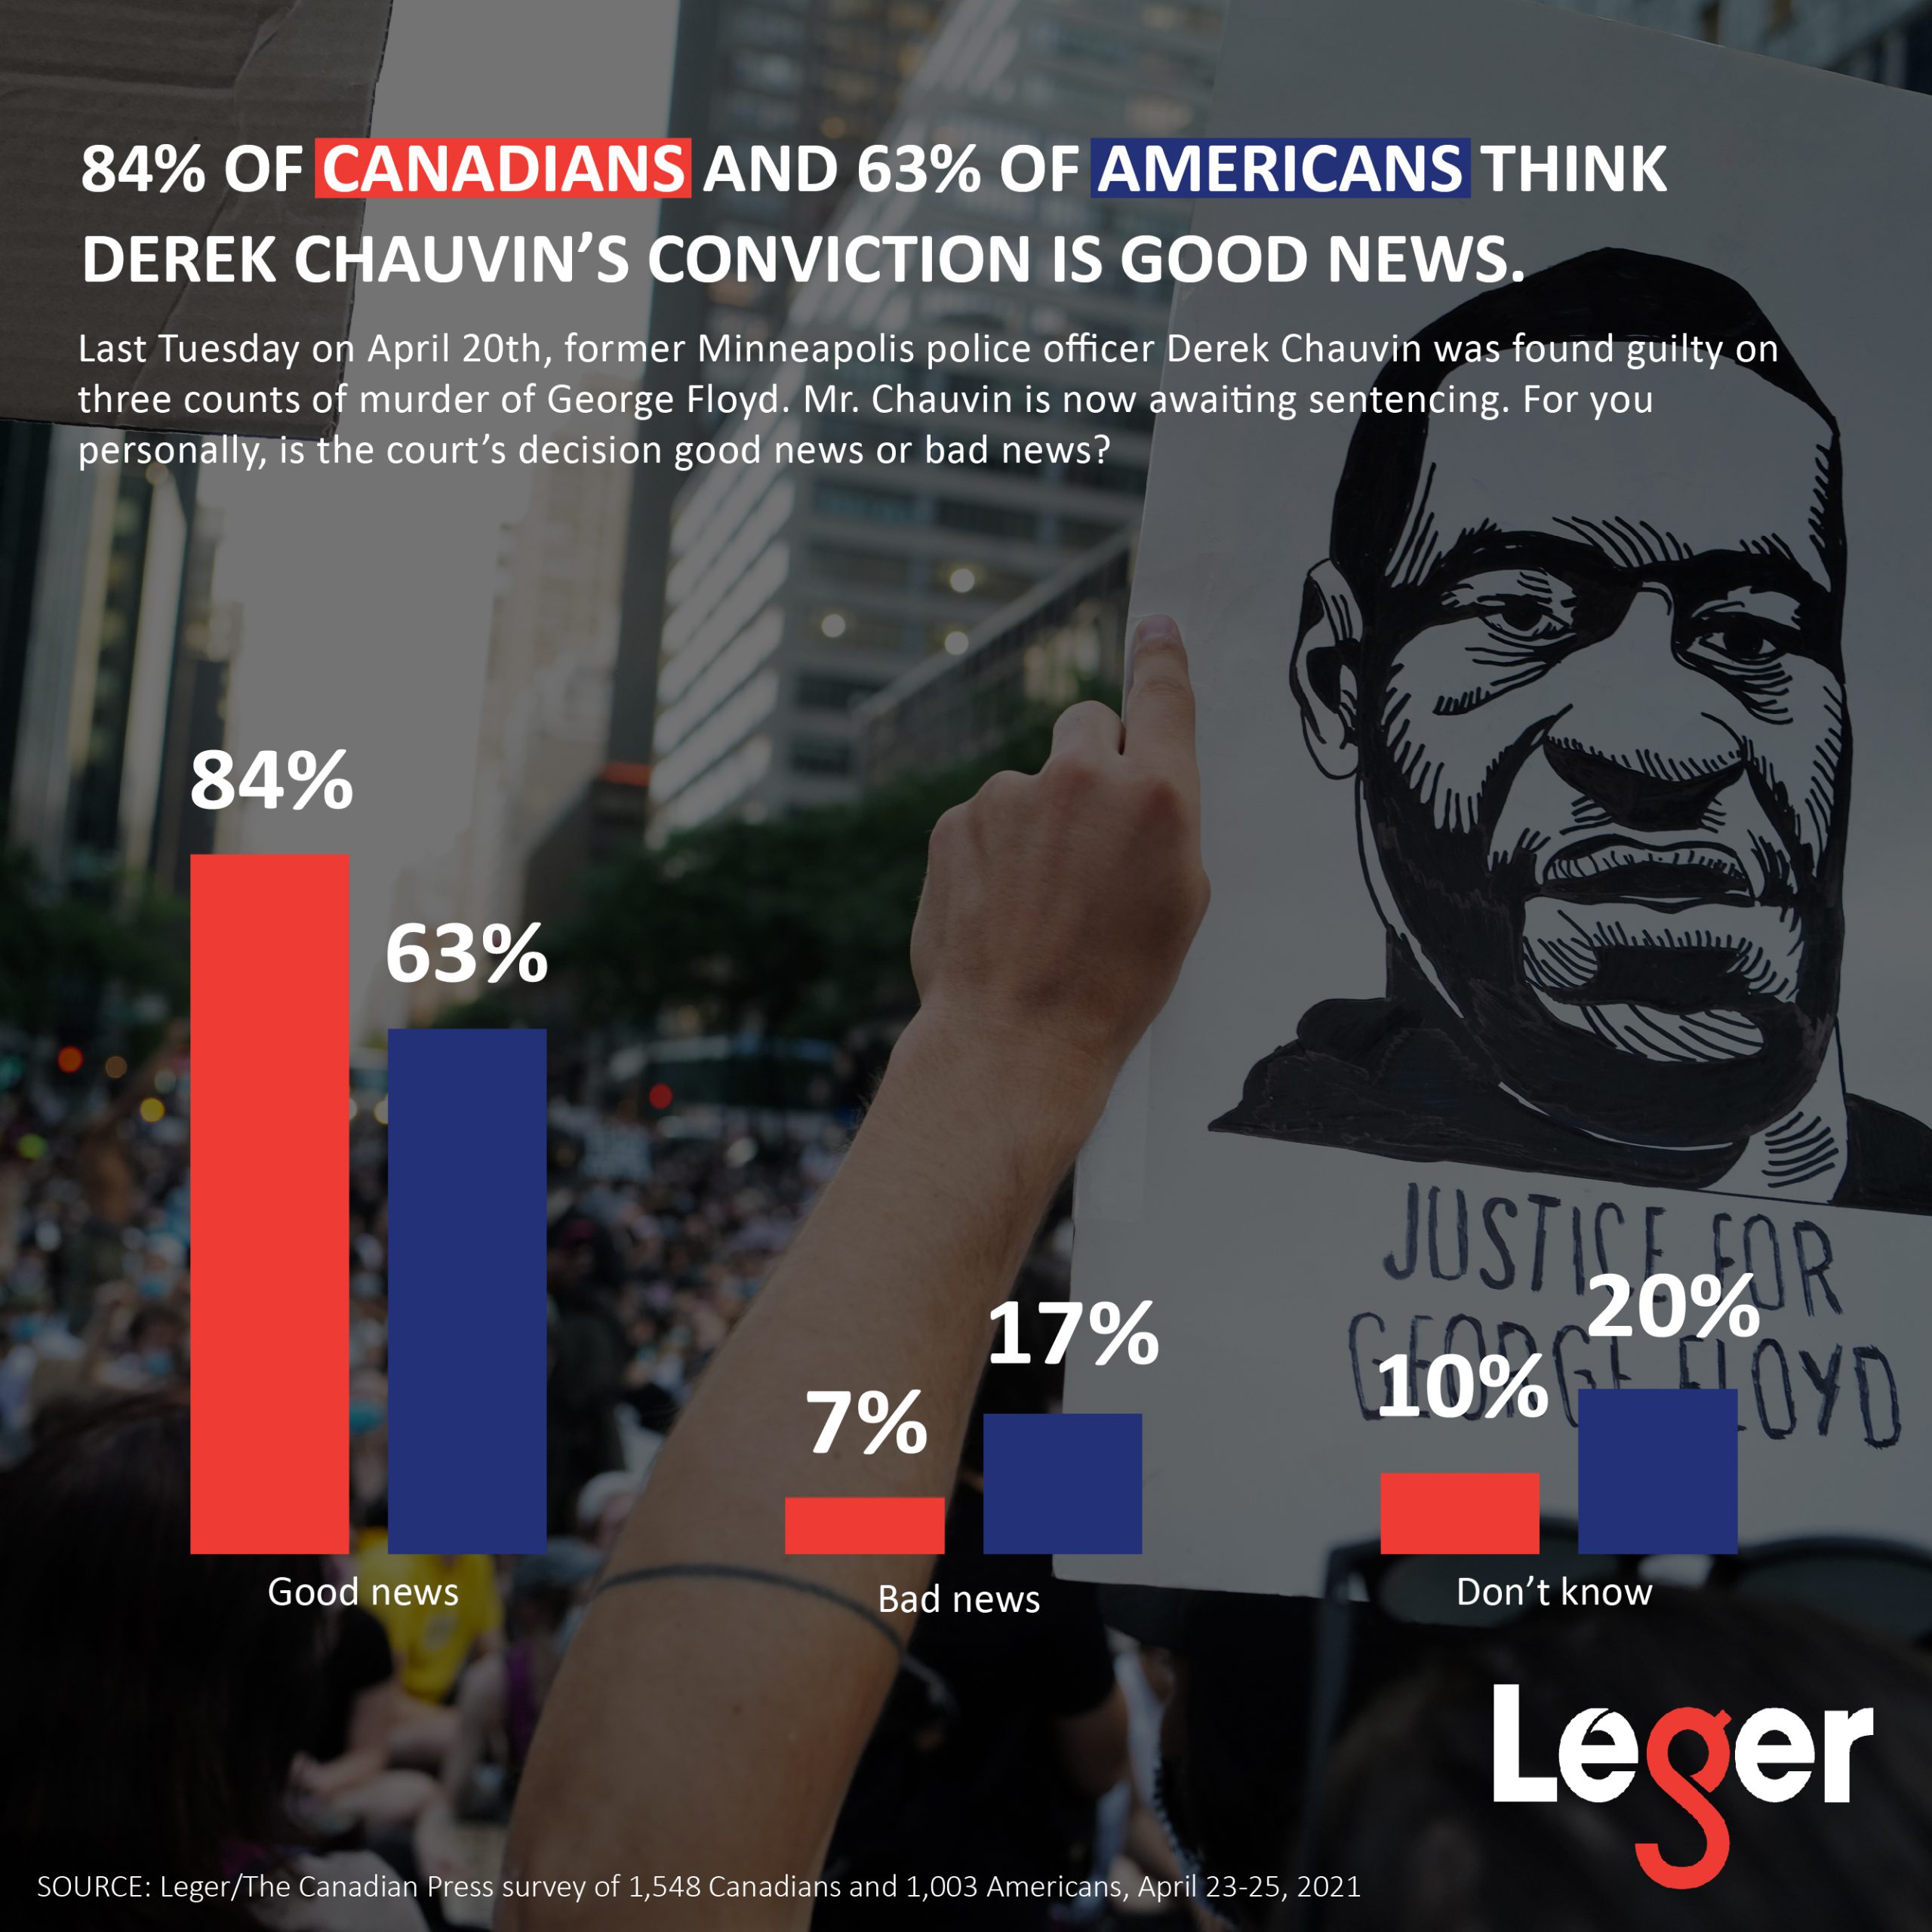 84% of Canadians and 63% of Americans think Derek Chauvin's conviction is good news.